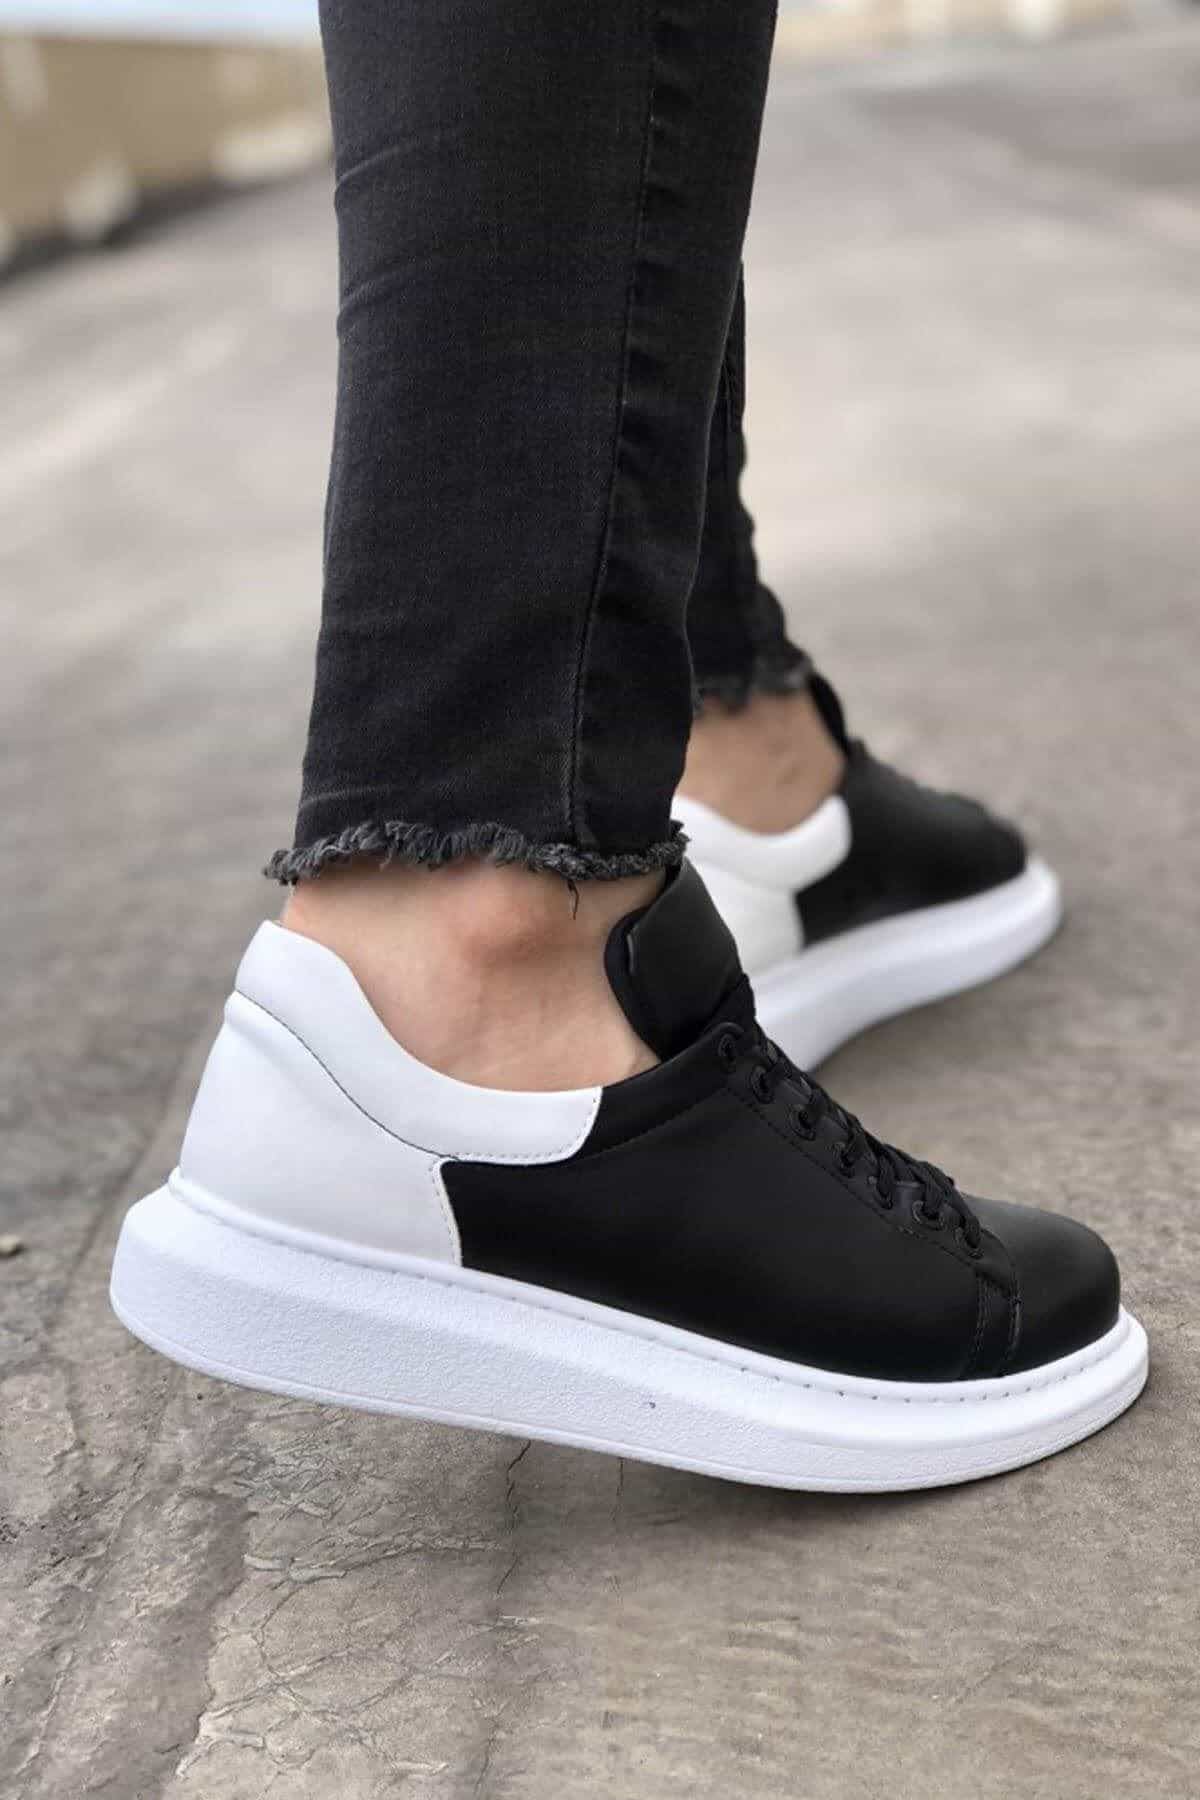 Chekich Men's & Women's Shoes Black and White Non Leather Lace Up Mixed Colors Casual Unisex Sneakers Comfortable Spring Fall Orthopedic Odorless Sport Lightweight Breathable Ladies Gentlemen Sewing Sole Suits CH256 V1